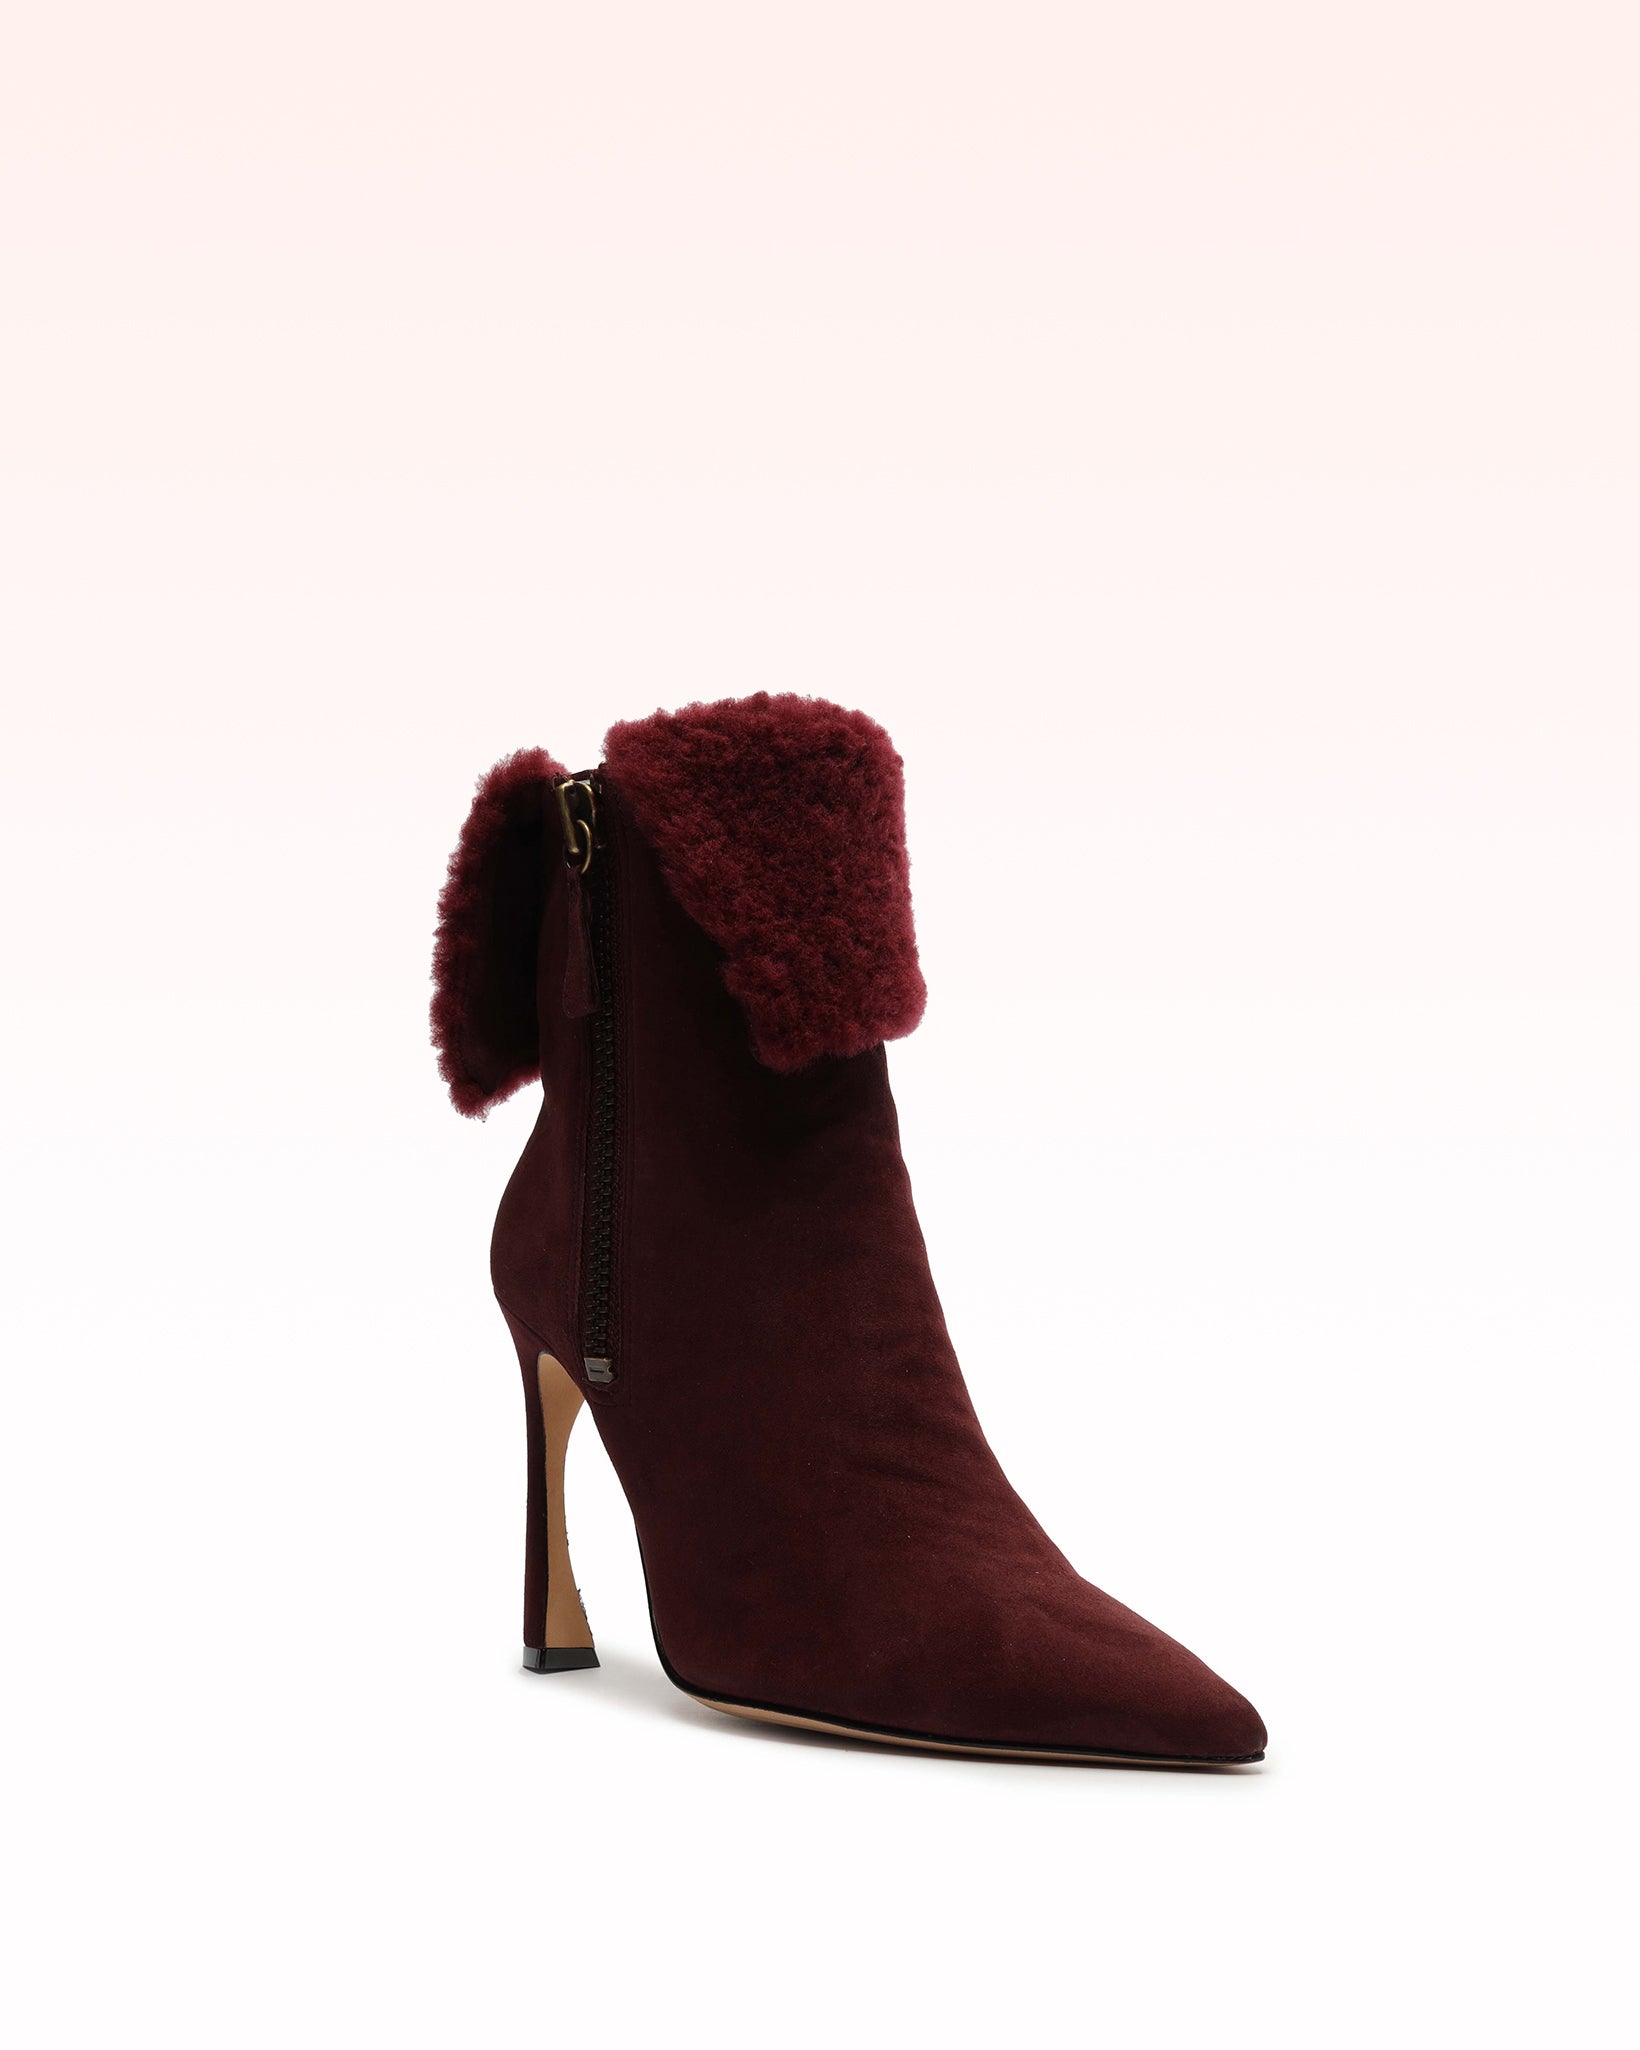 Mirabella 100 Curly Suede & Shearling Bootie